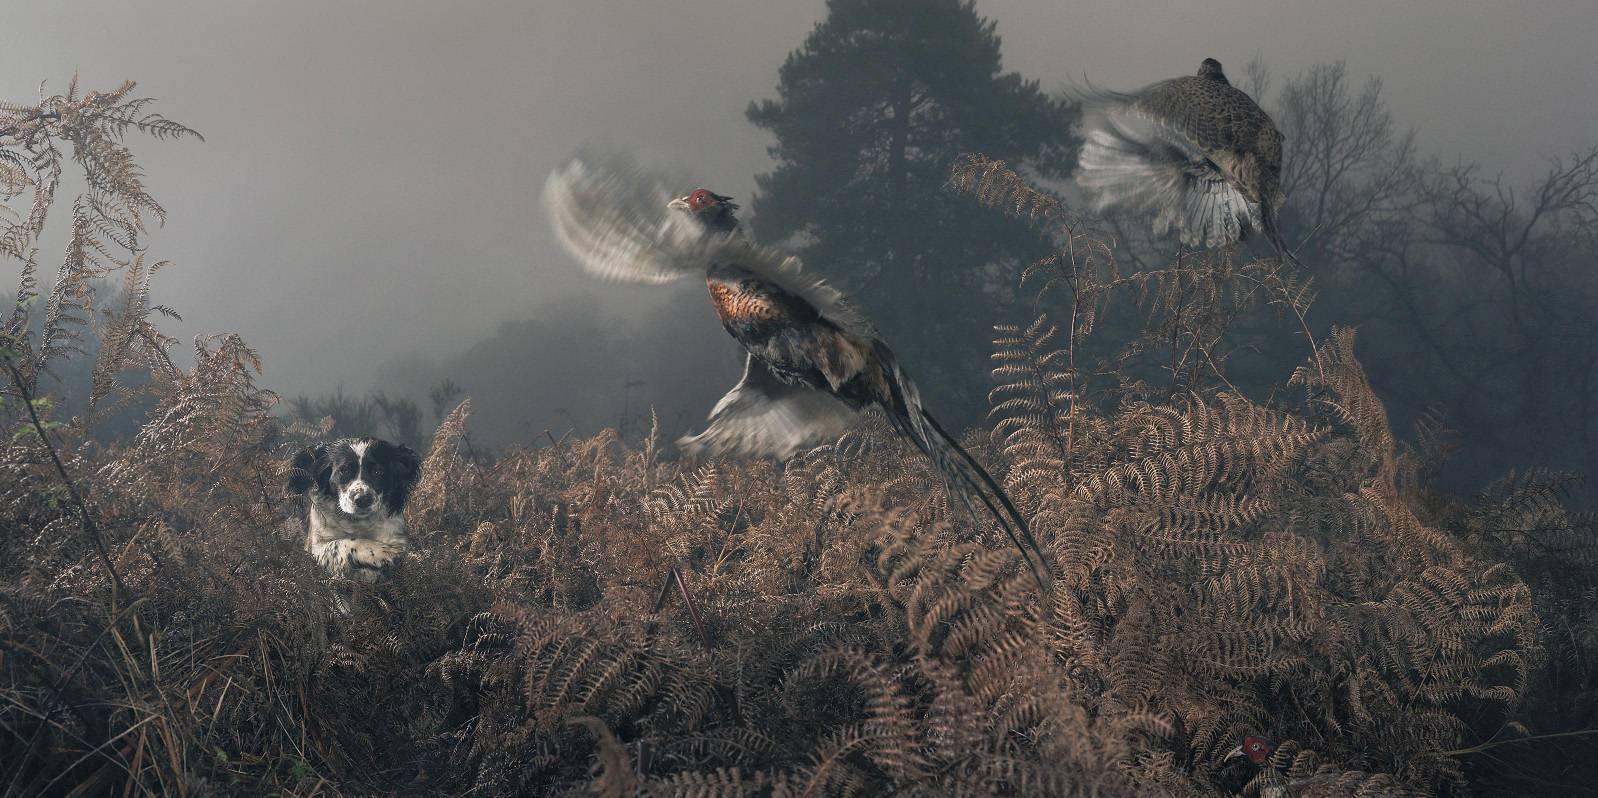 Penny Working the Bracken - Photograph by Tim Flach